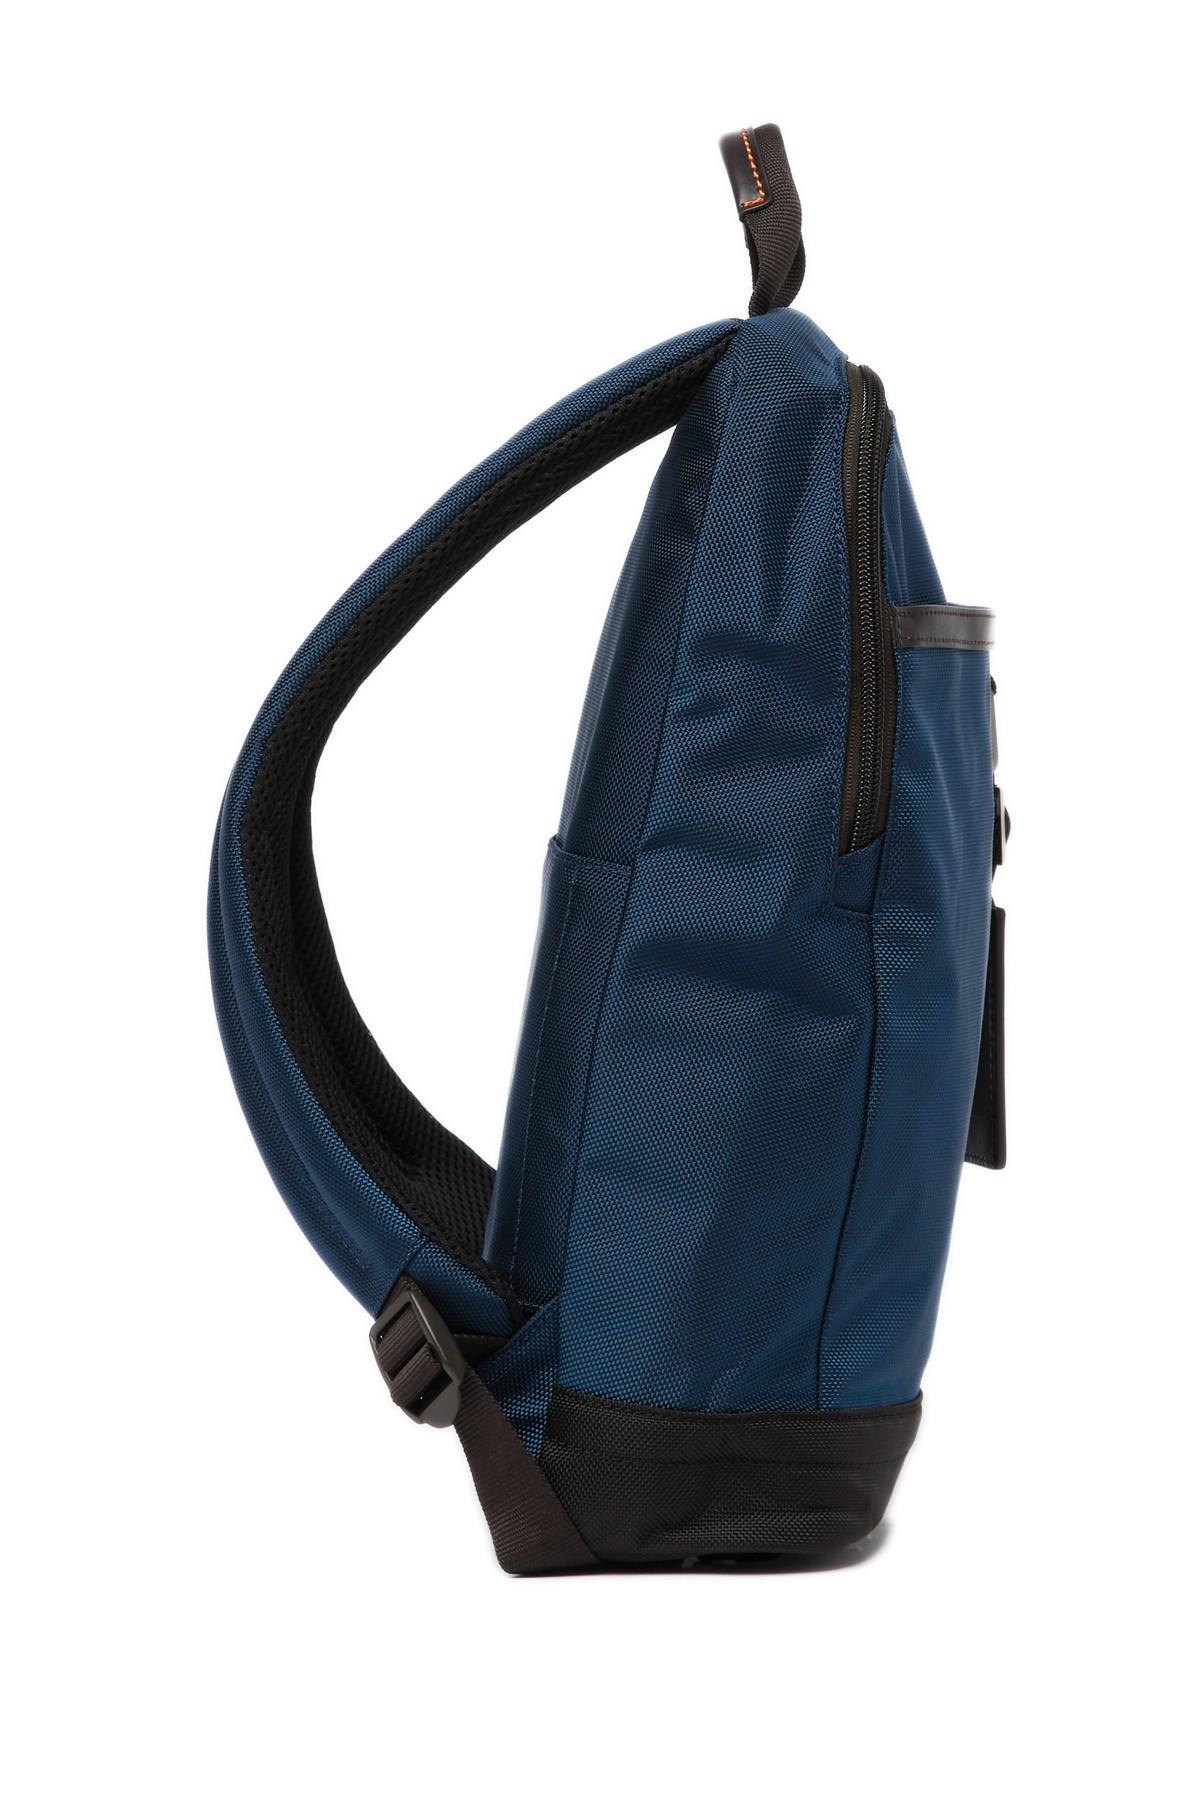 Tumi Leather Westwood Slim Backpack in Blue for Men - Lyst